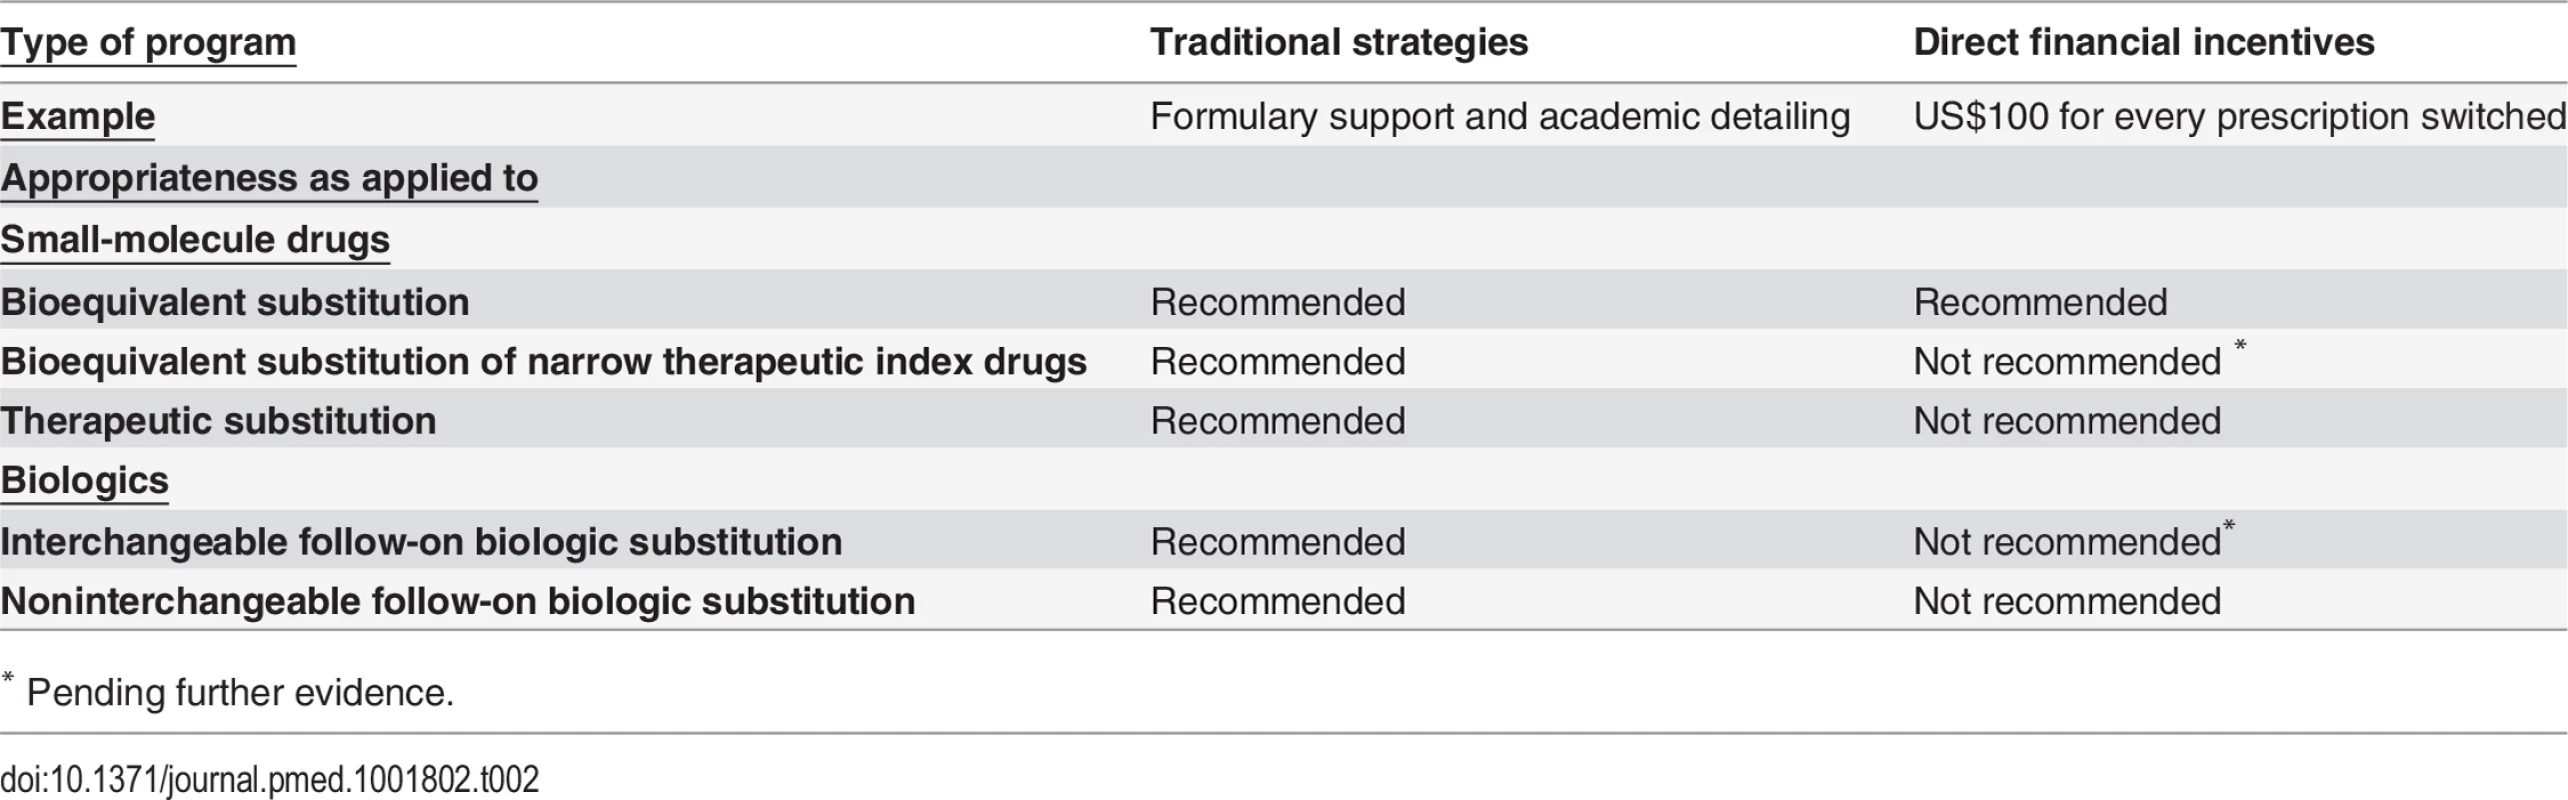 Authors’ evaluation of physician-centered strategies to promote generic drug and follow-on biologic prescribing